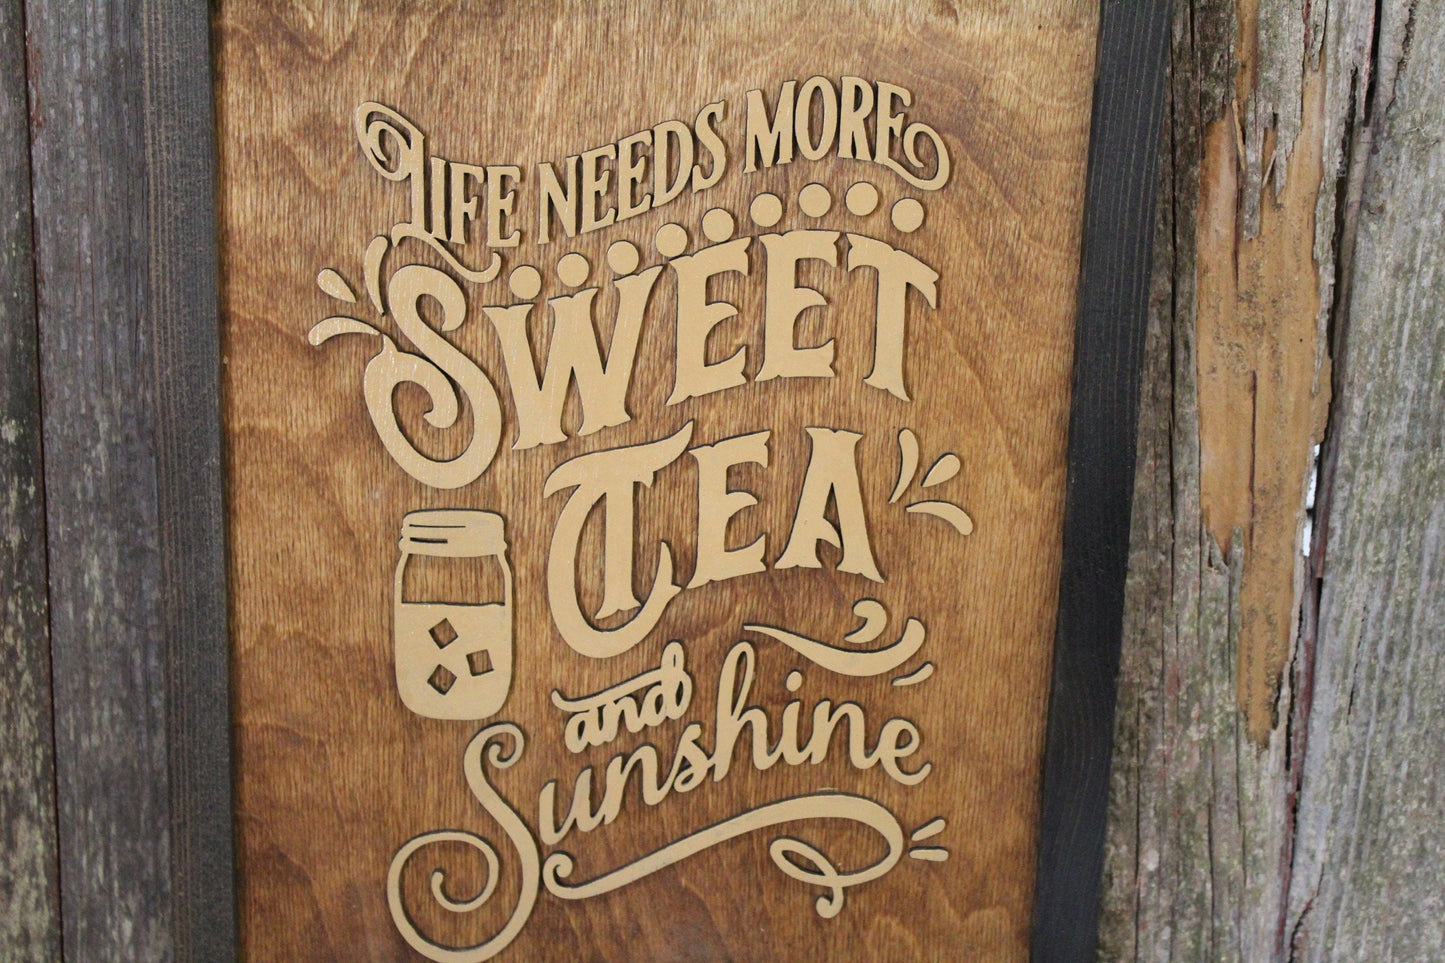 Sweet Tea Porch Sign Life Needs More Sunshine Porch Sitting Wood Sign 3D Raised Text Country Farmhouse Cabin Porch Decoration Relax